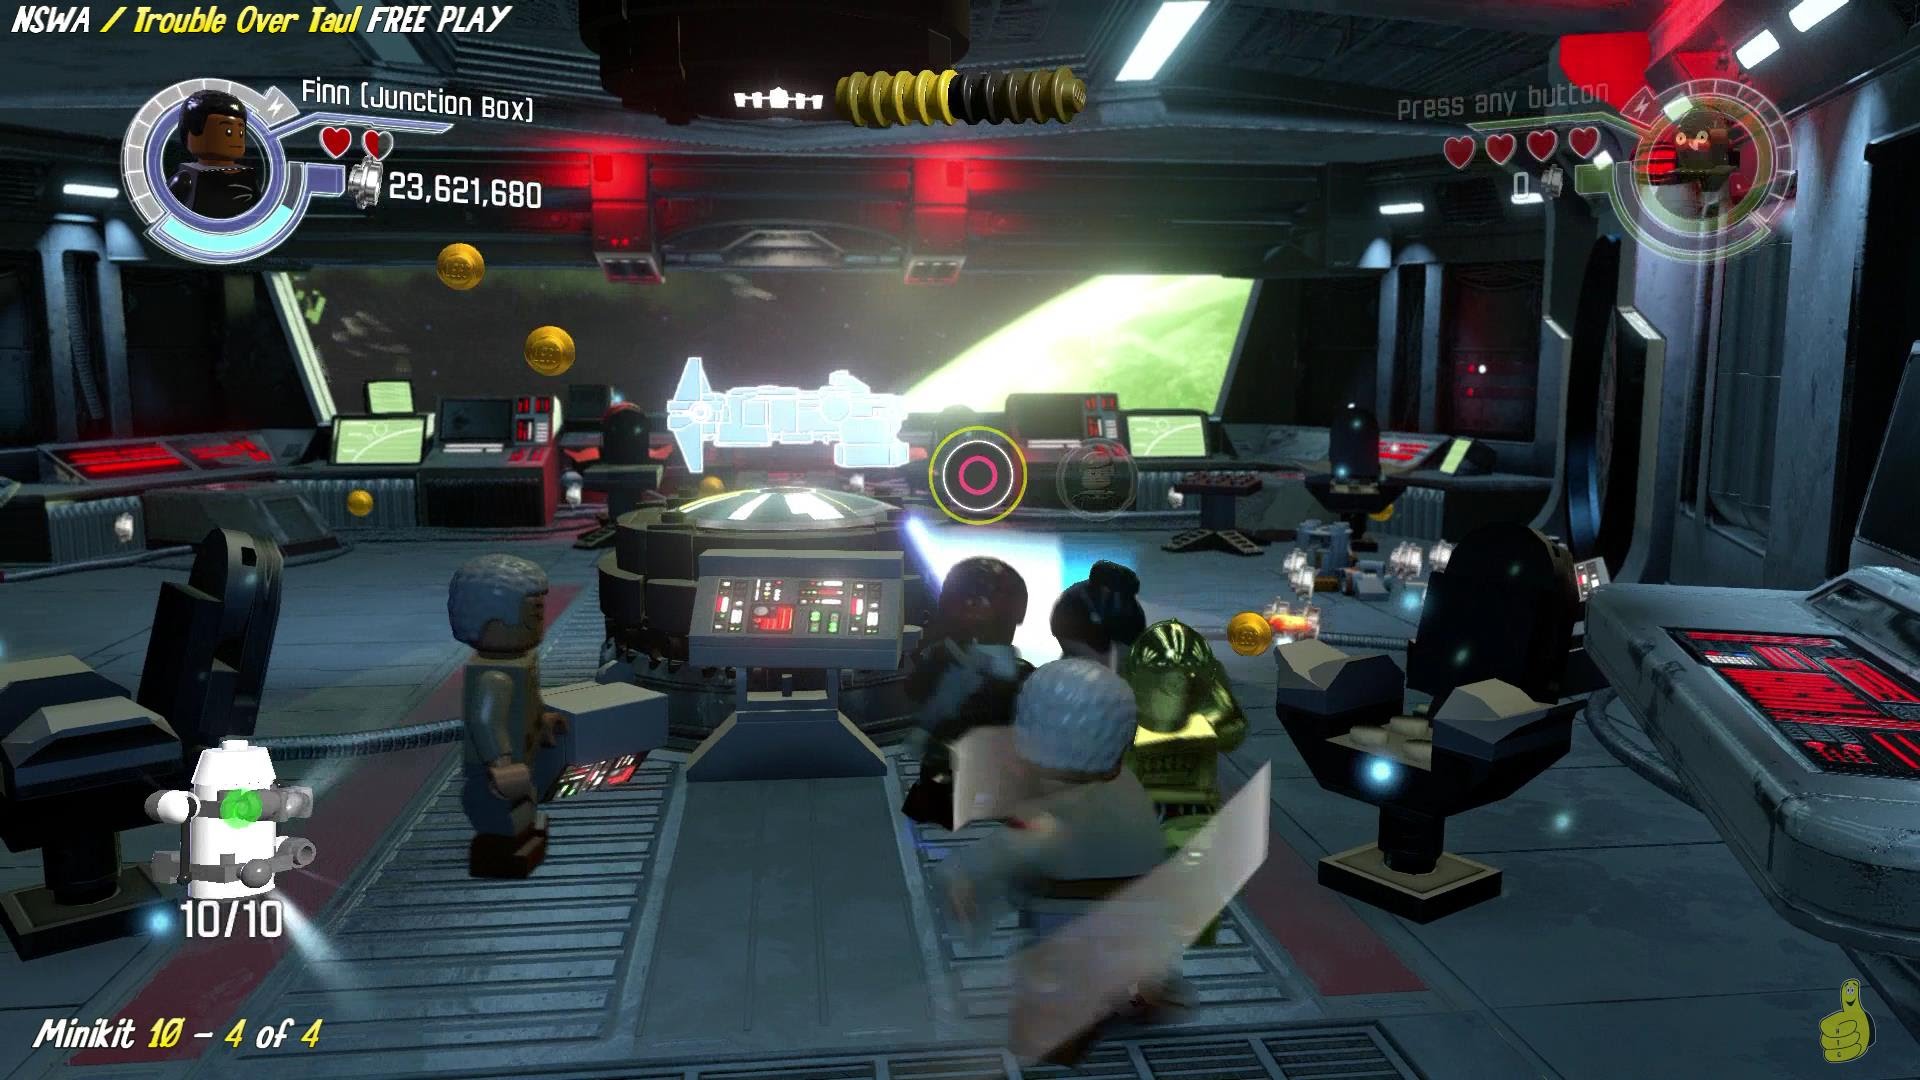 Lego Star Wars The Force Awakens: NSWA / Trouble Taul FREE PLAY (All Minikits & Red HTG – Gaming